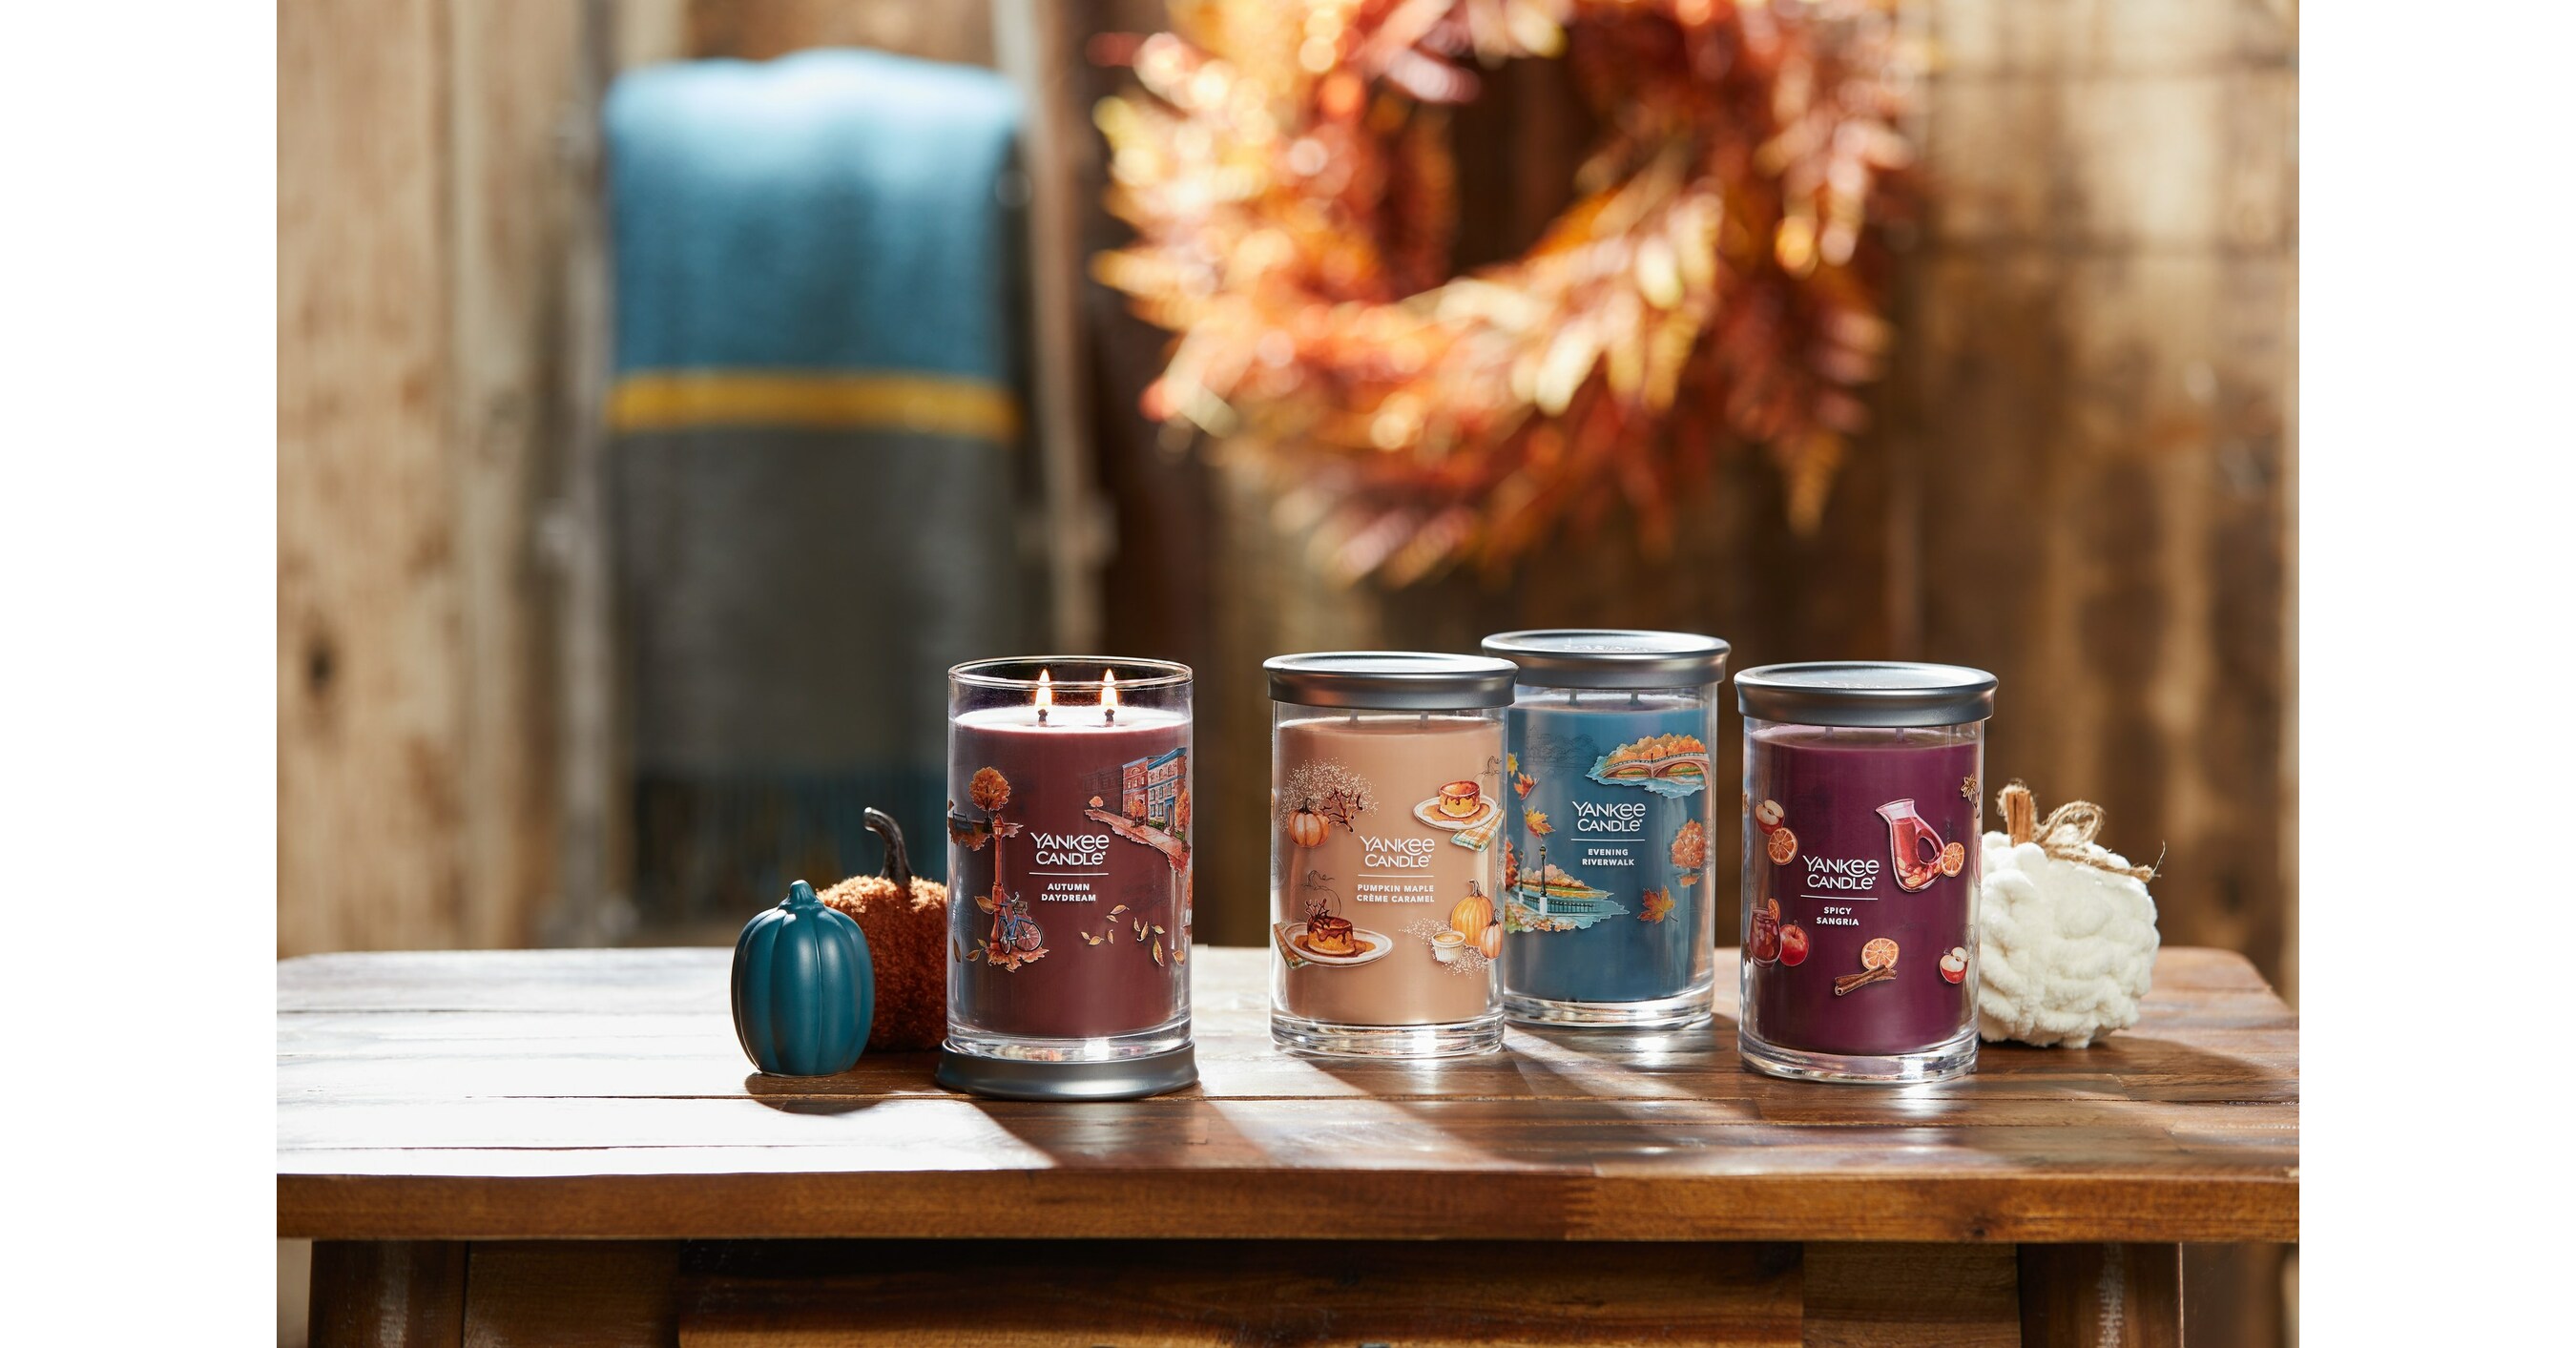 https://mma.prnewswire.com/media/2157749/Yankee_Candle_Daydreaming_of_Autumn_Collection.jpg?p=facebook